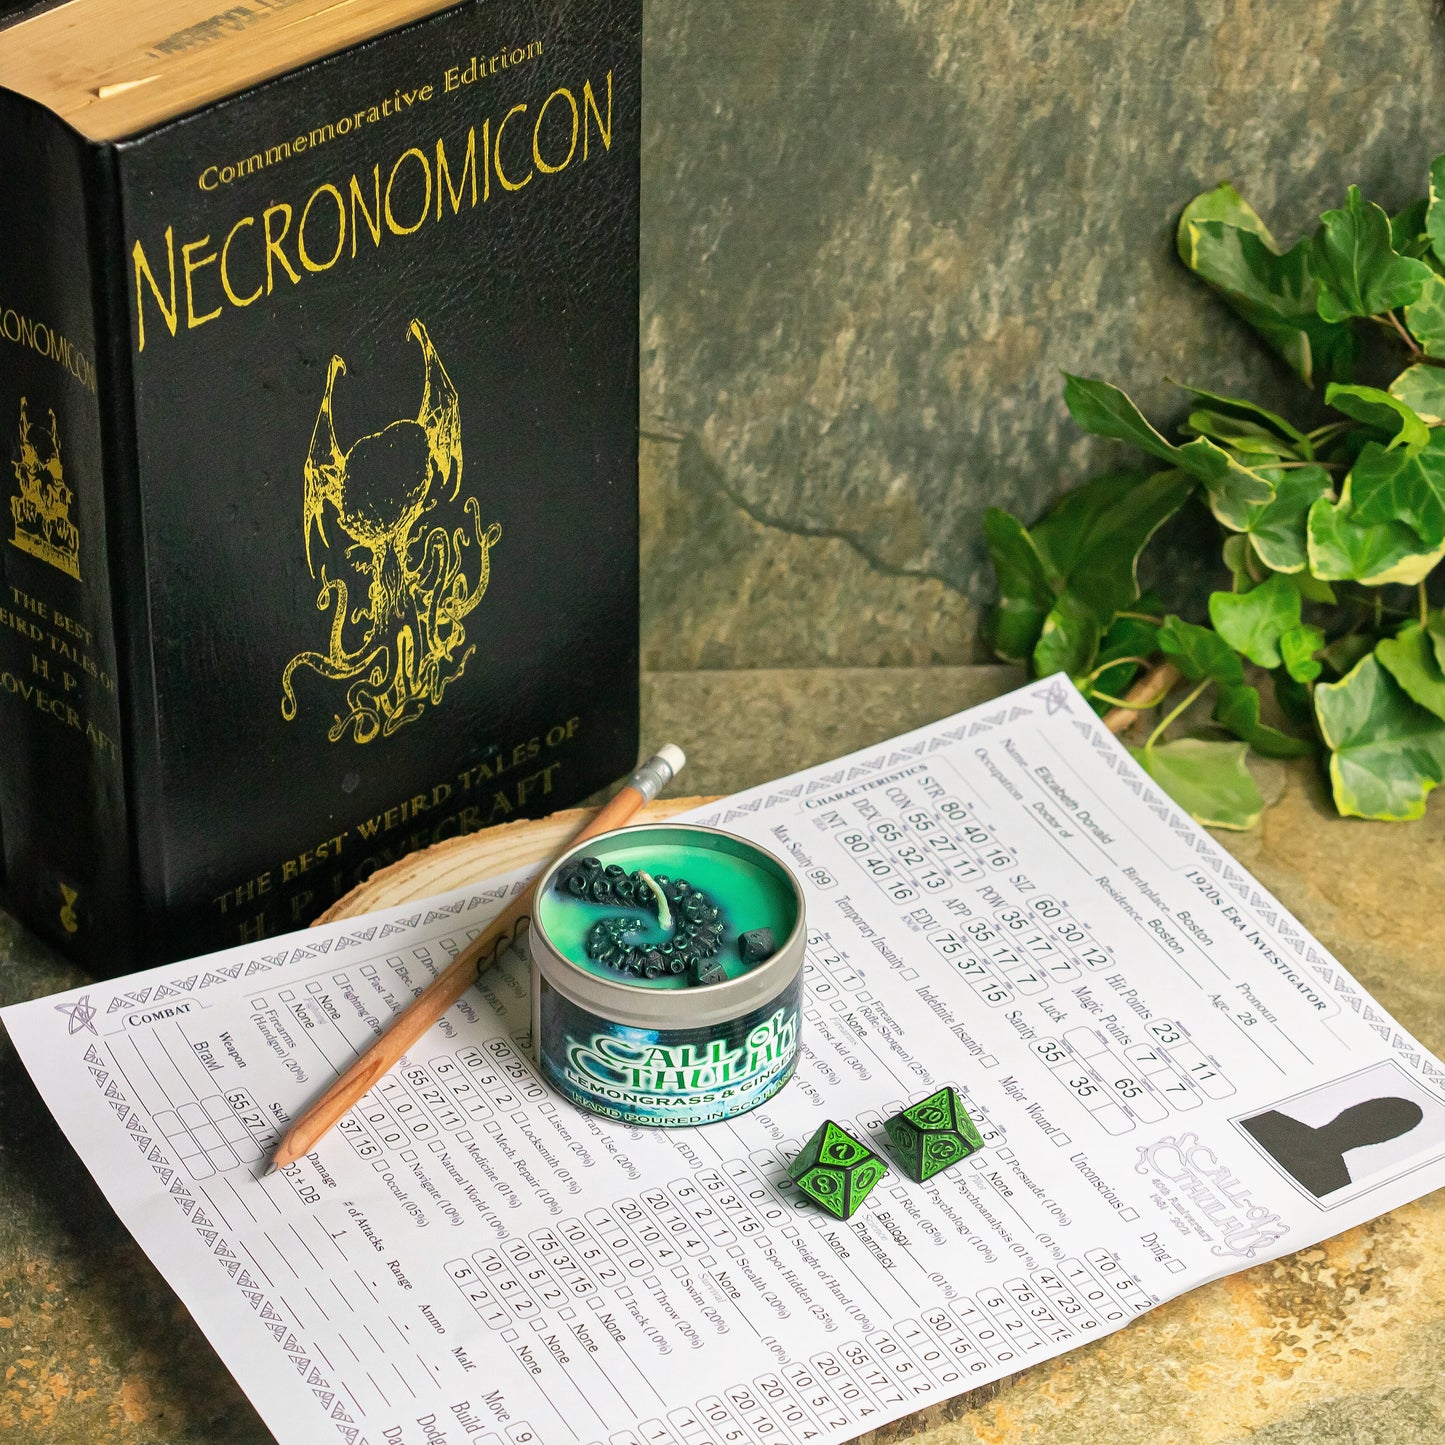 Call of Cthulhu Candle, Soy Wax, 35 hrs+ burn time, RPG Inspired Candle, Lovecraftian Candle, Cthulhu Mythos Candle, Call of Cthulhu RPG